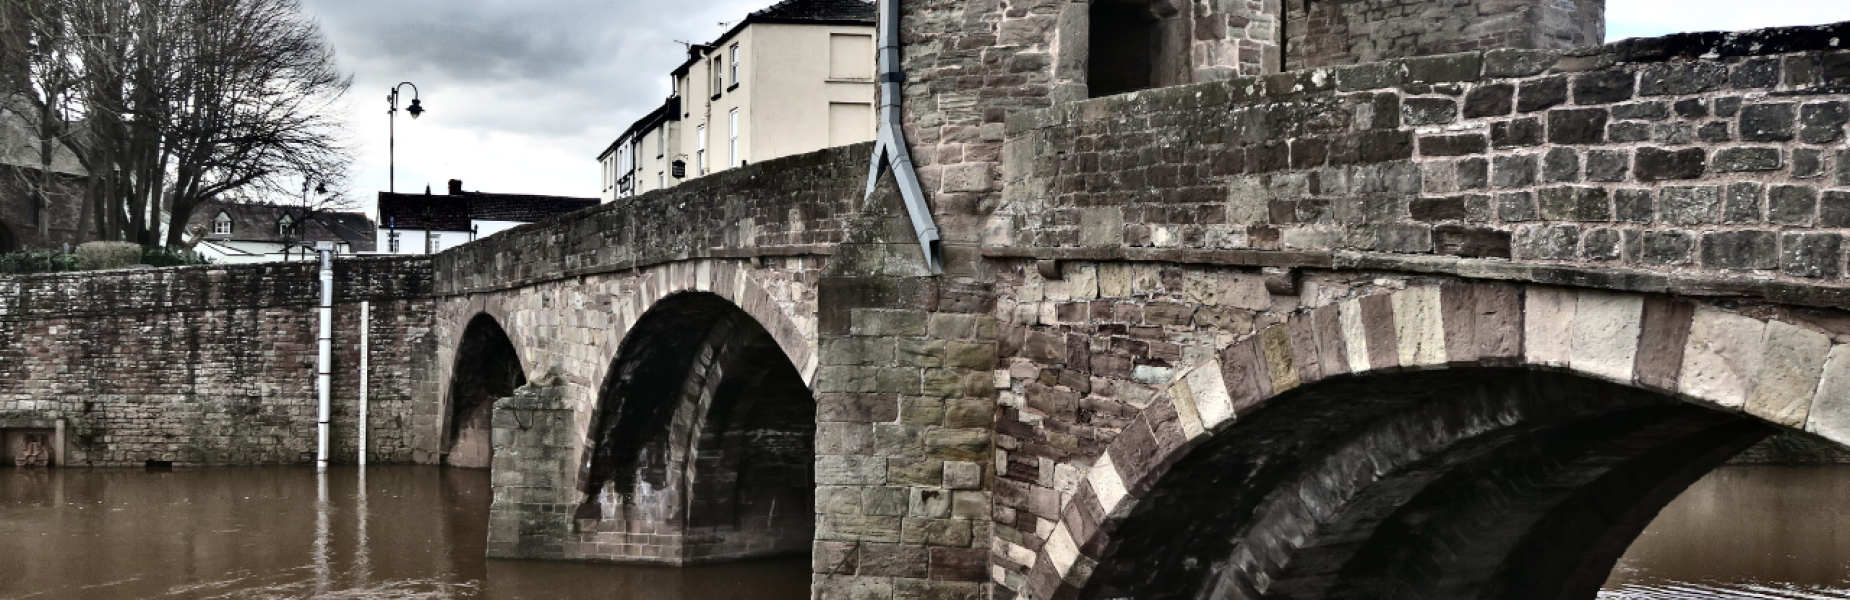 a picture of the medieval gated bridge at Monmouth